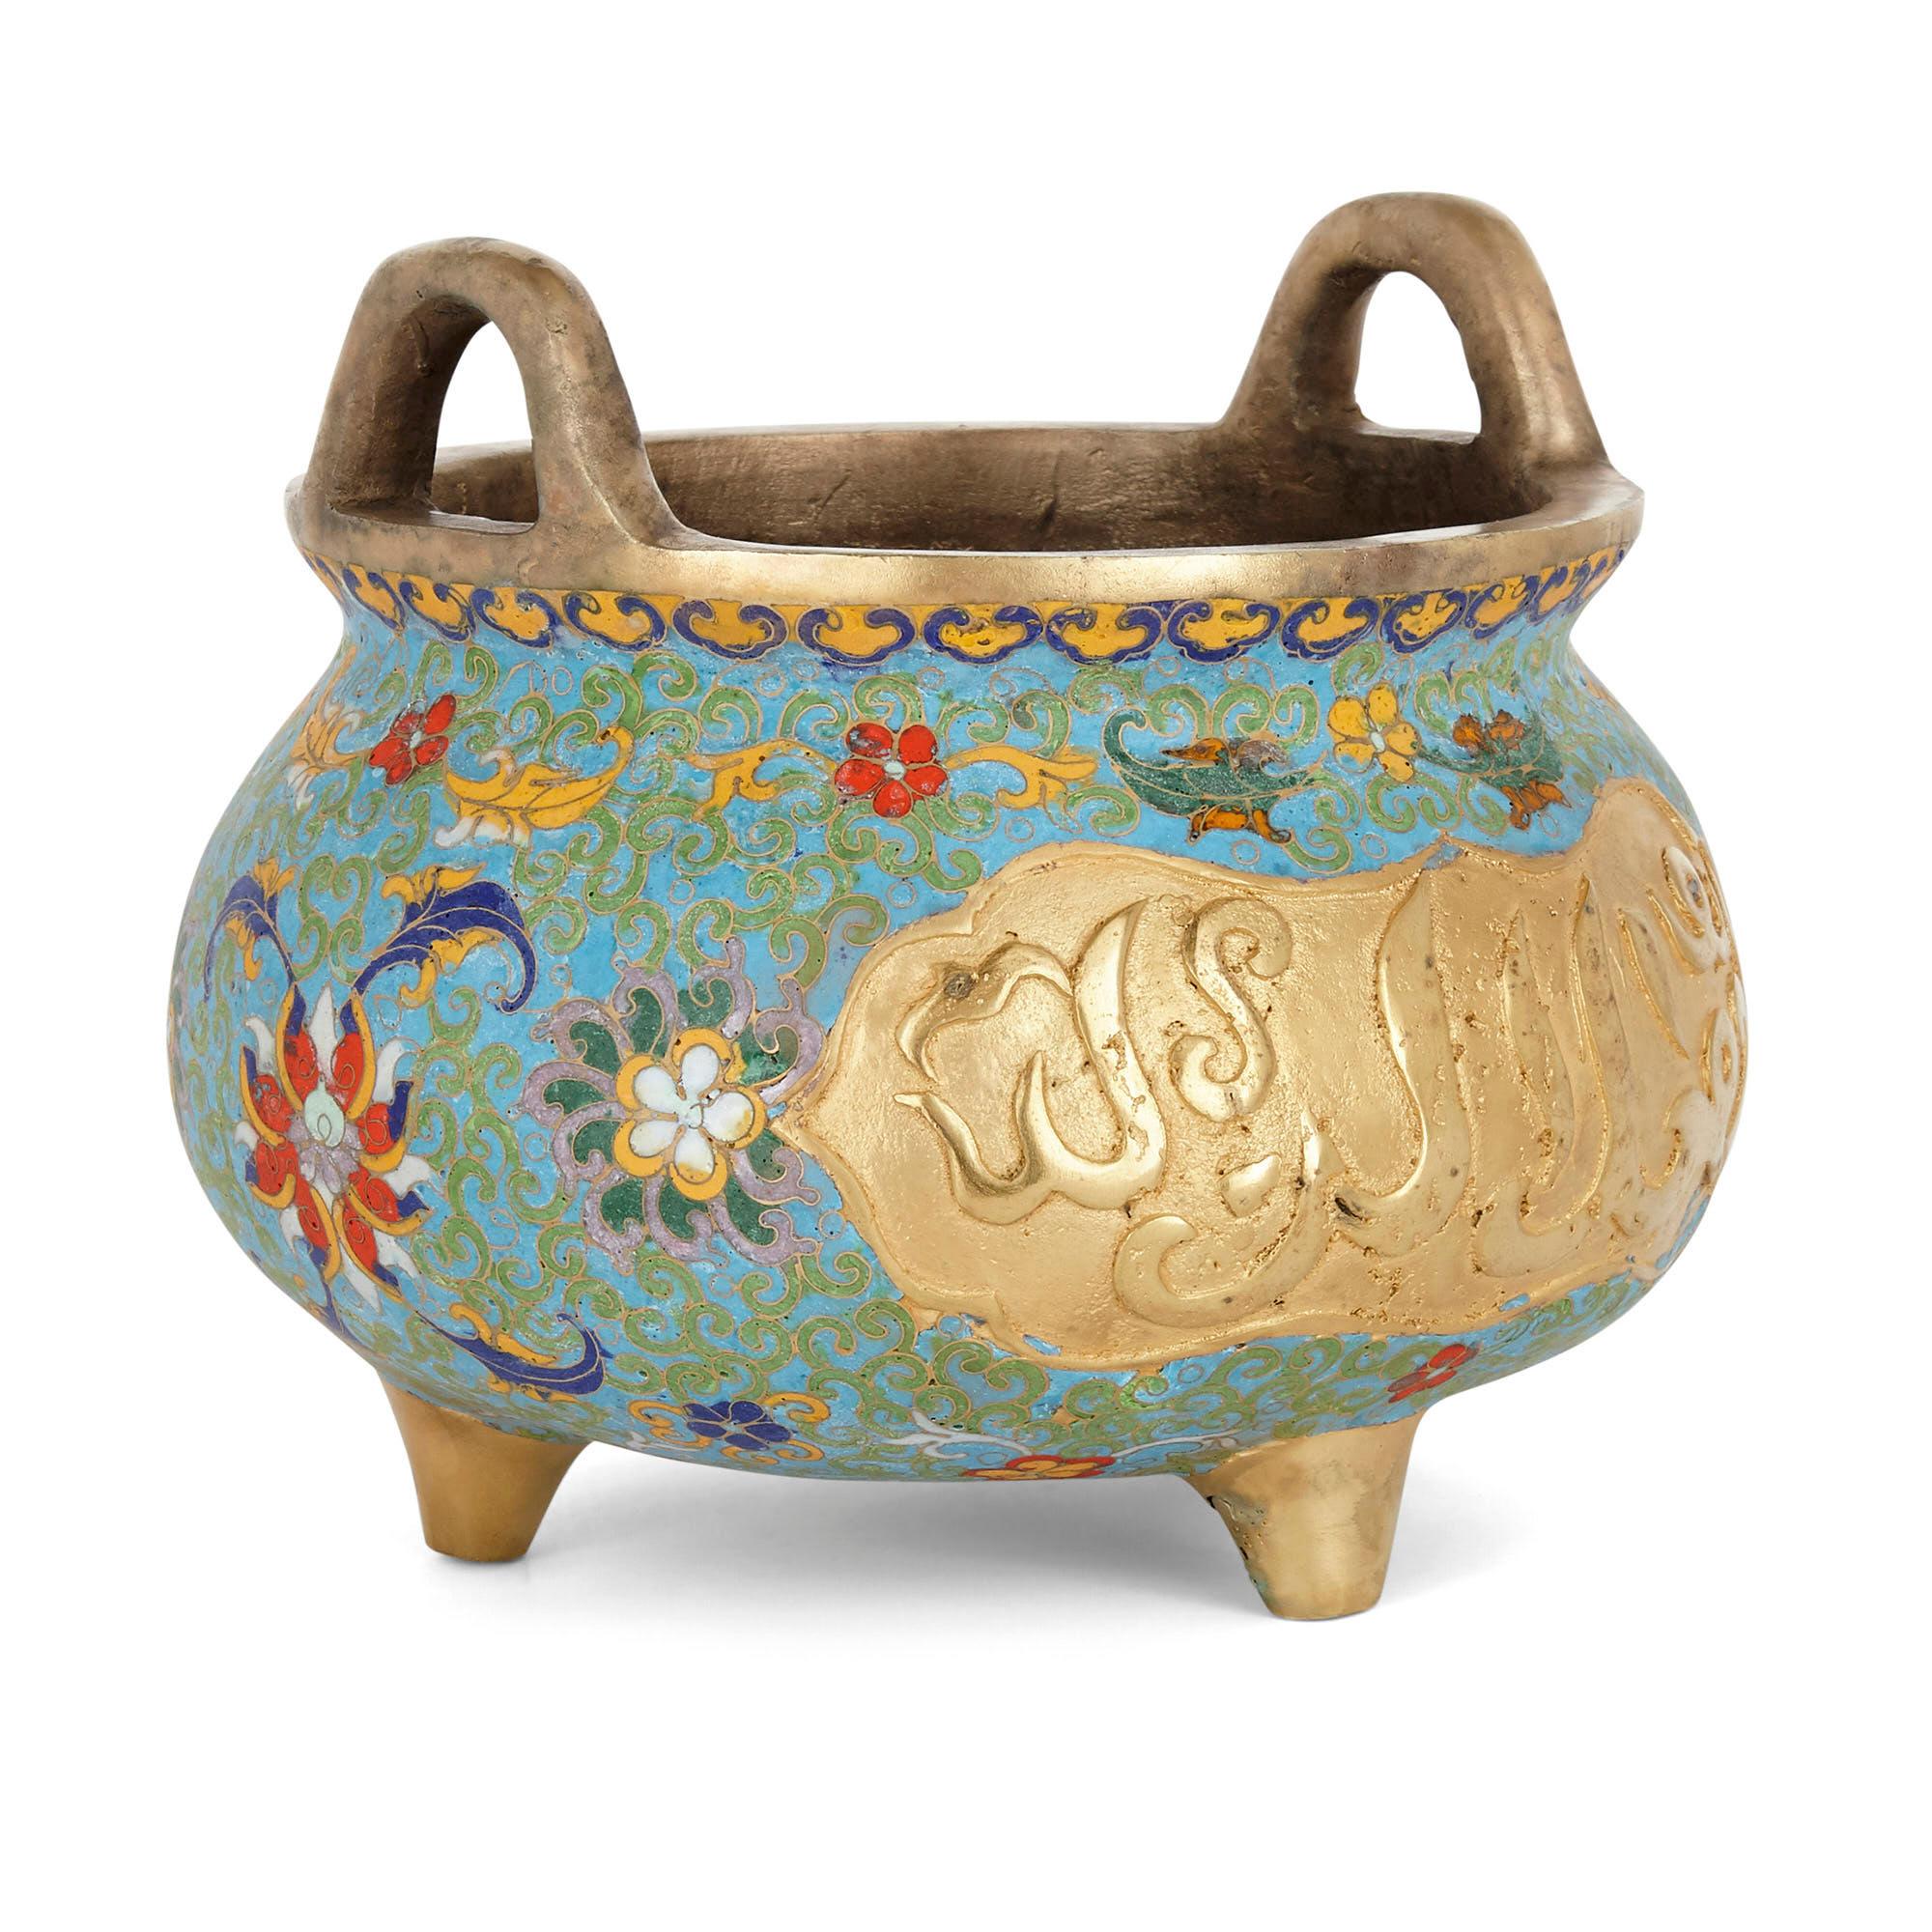 Chinese floral Cloisonné enamel and ormolu vase for Islamic Market.
Chinese, early 20th century
Dimensions: Height 20cm, diameter 23cm

This beautiful bowl is a superb example of Chinese export ware designed for an Islamic market. The bowl is